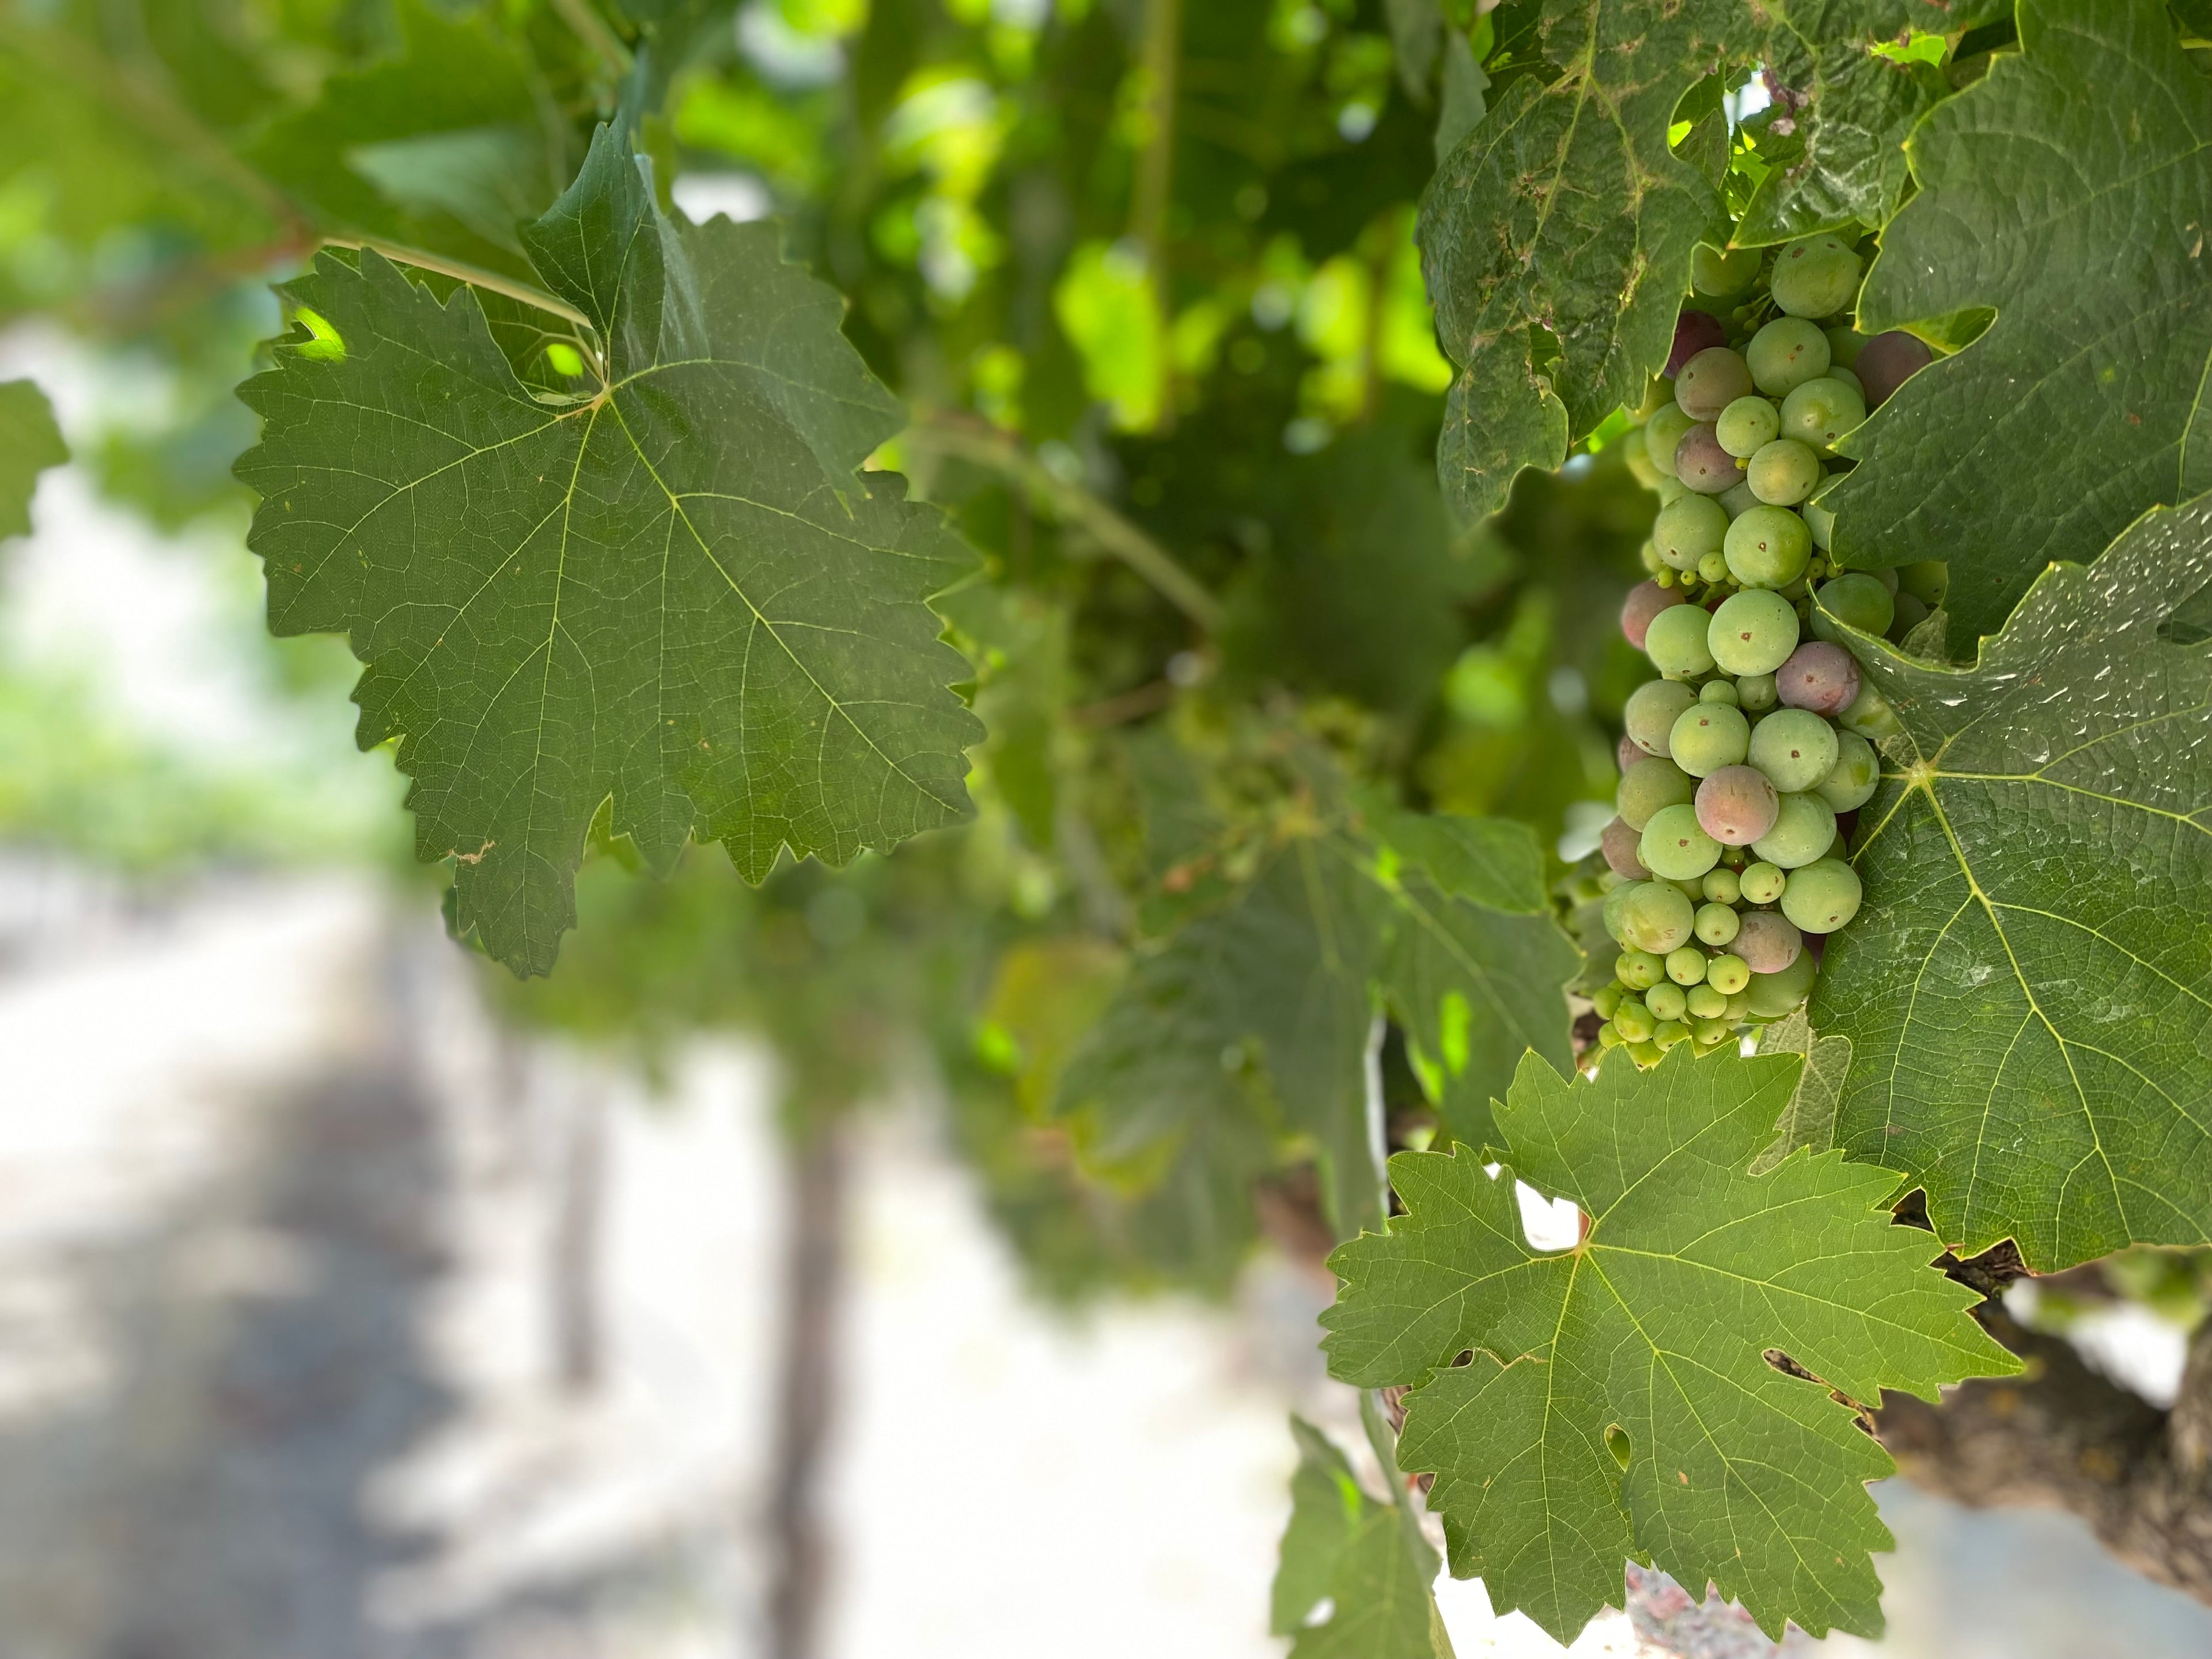 Close up of wine grapes growing on a vine in a Lodi, California vineyard, Harney Lane Winery and Vineyards.